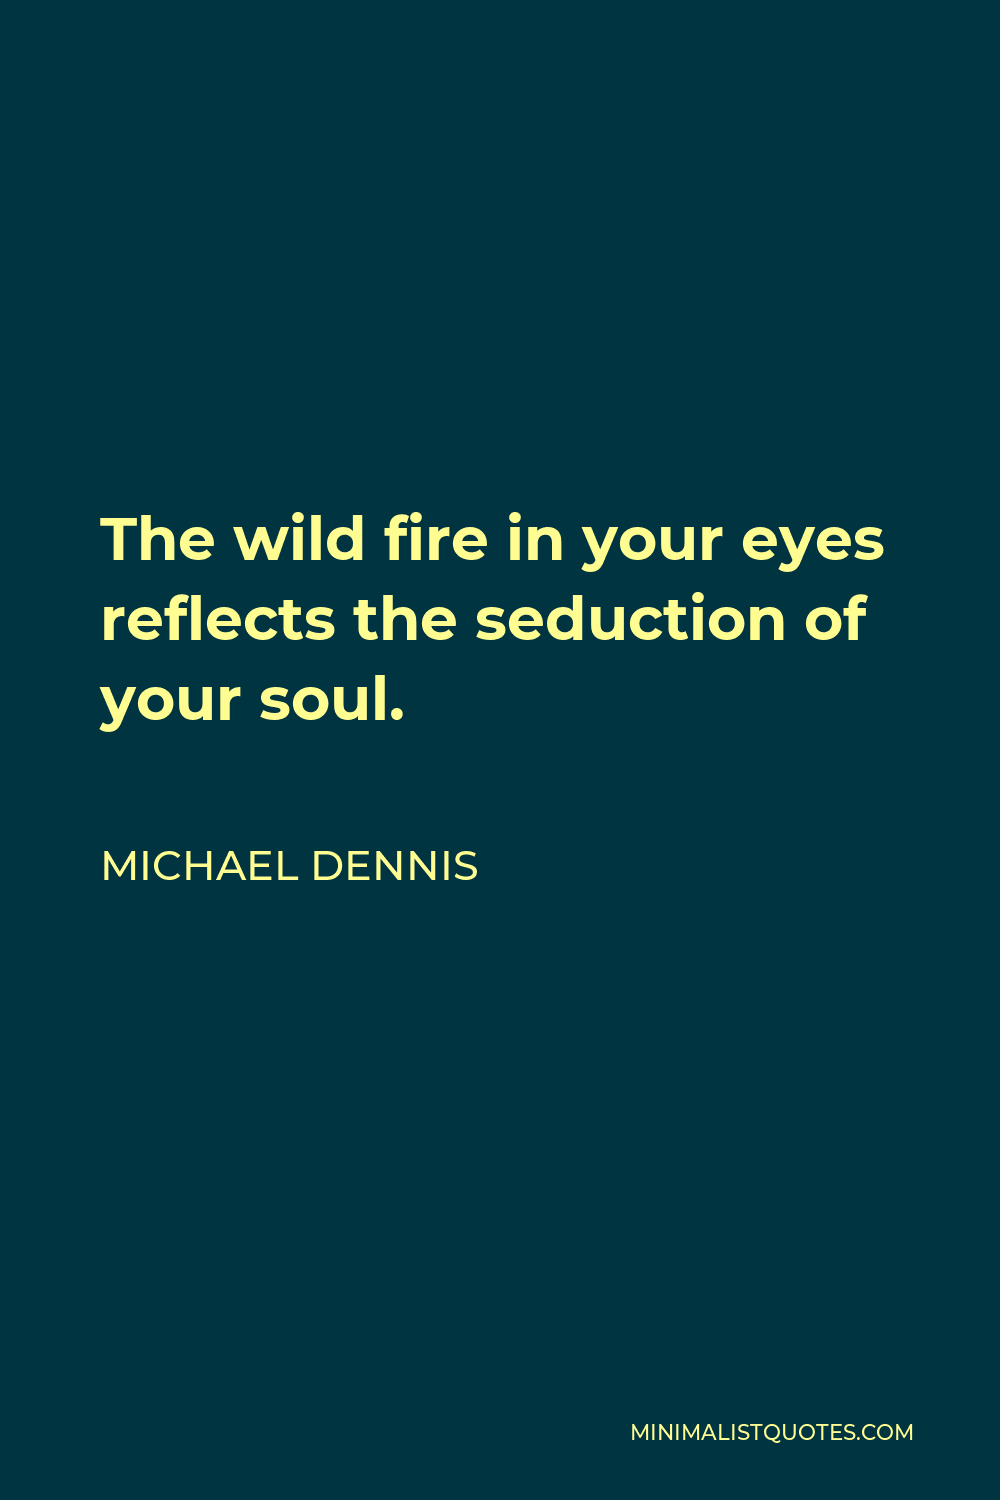 Michael Dennis Quote - The wild fire in your eyes reflects the seduction of your soul.